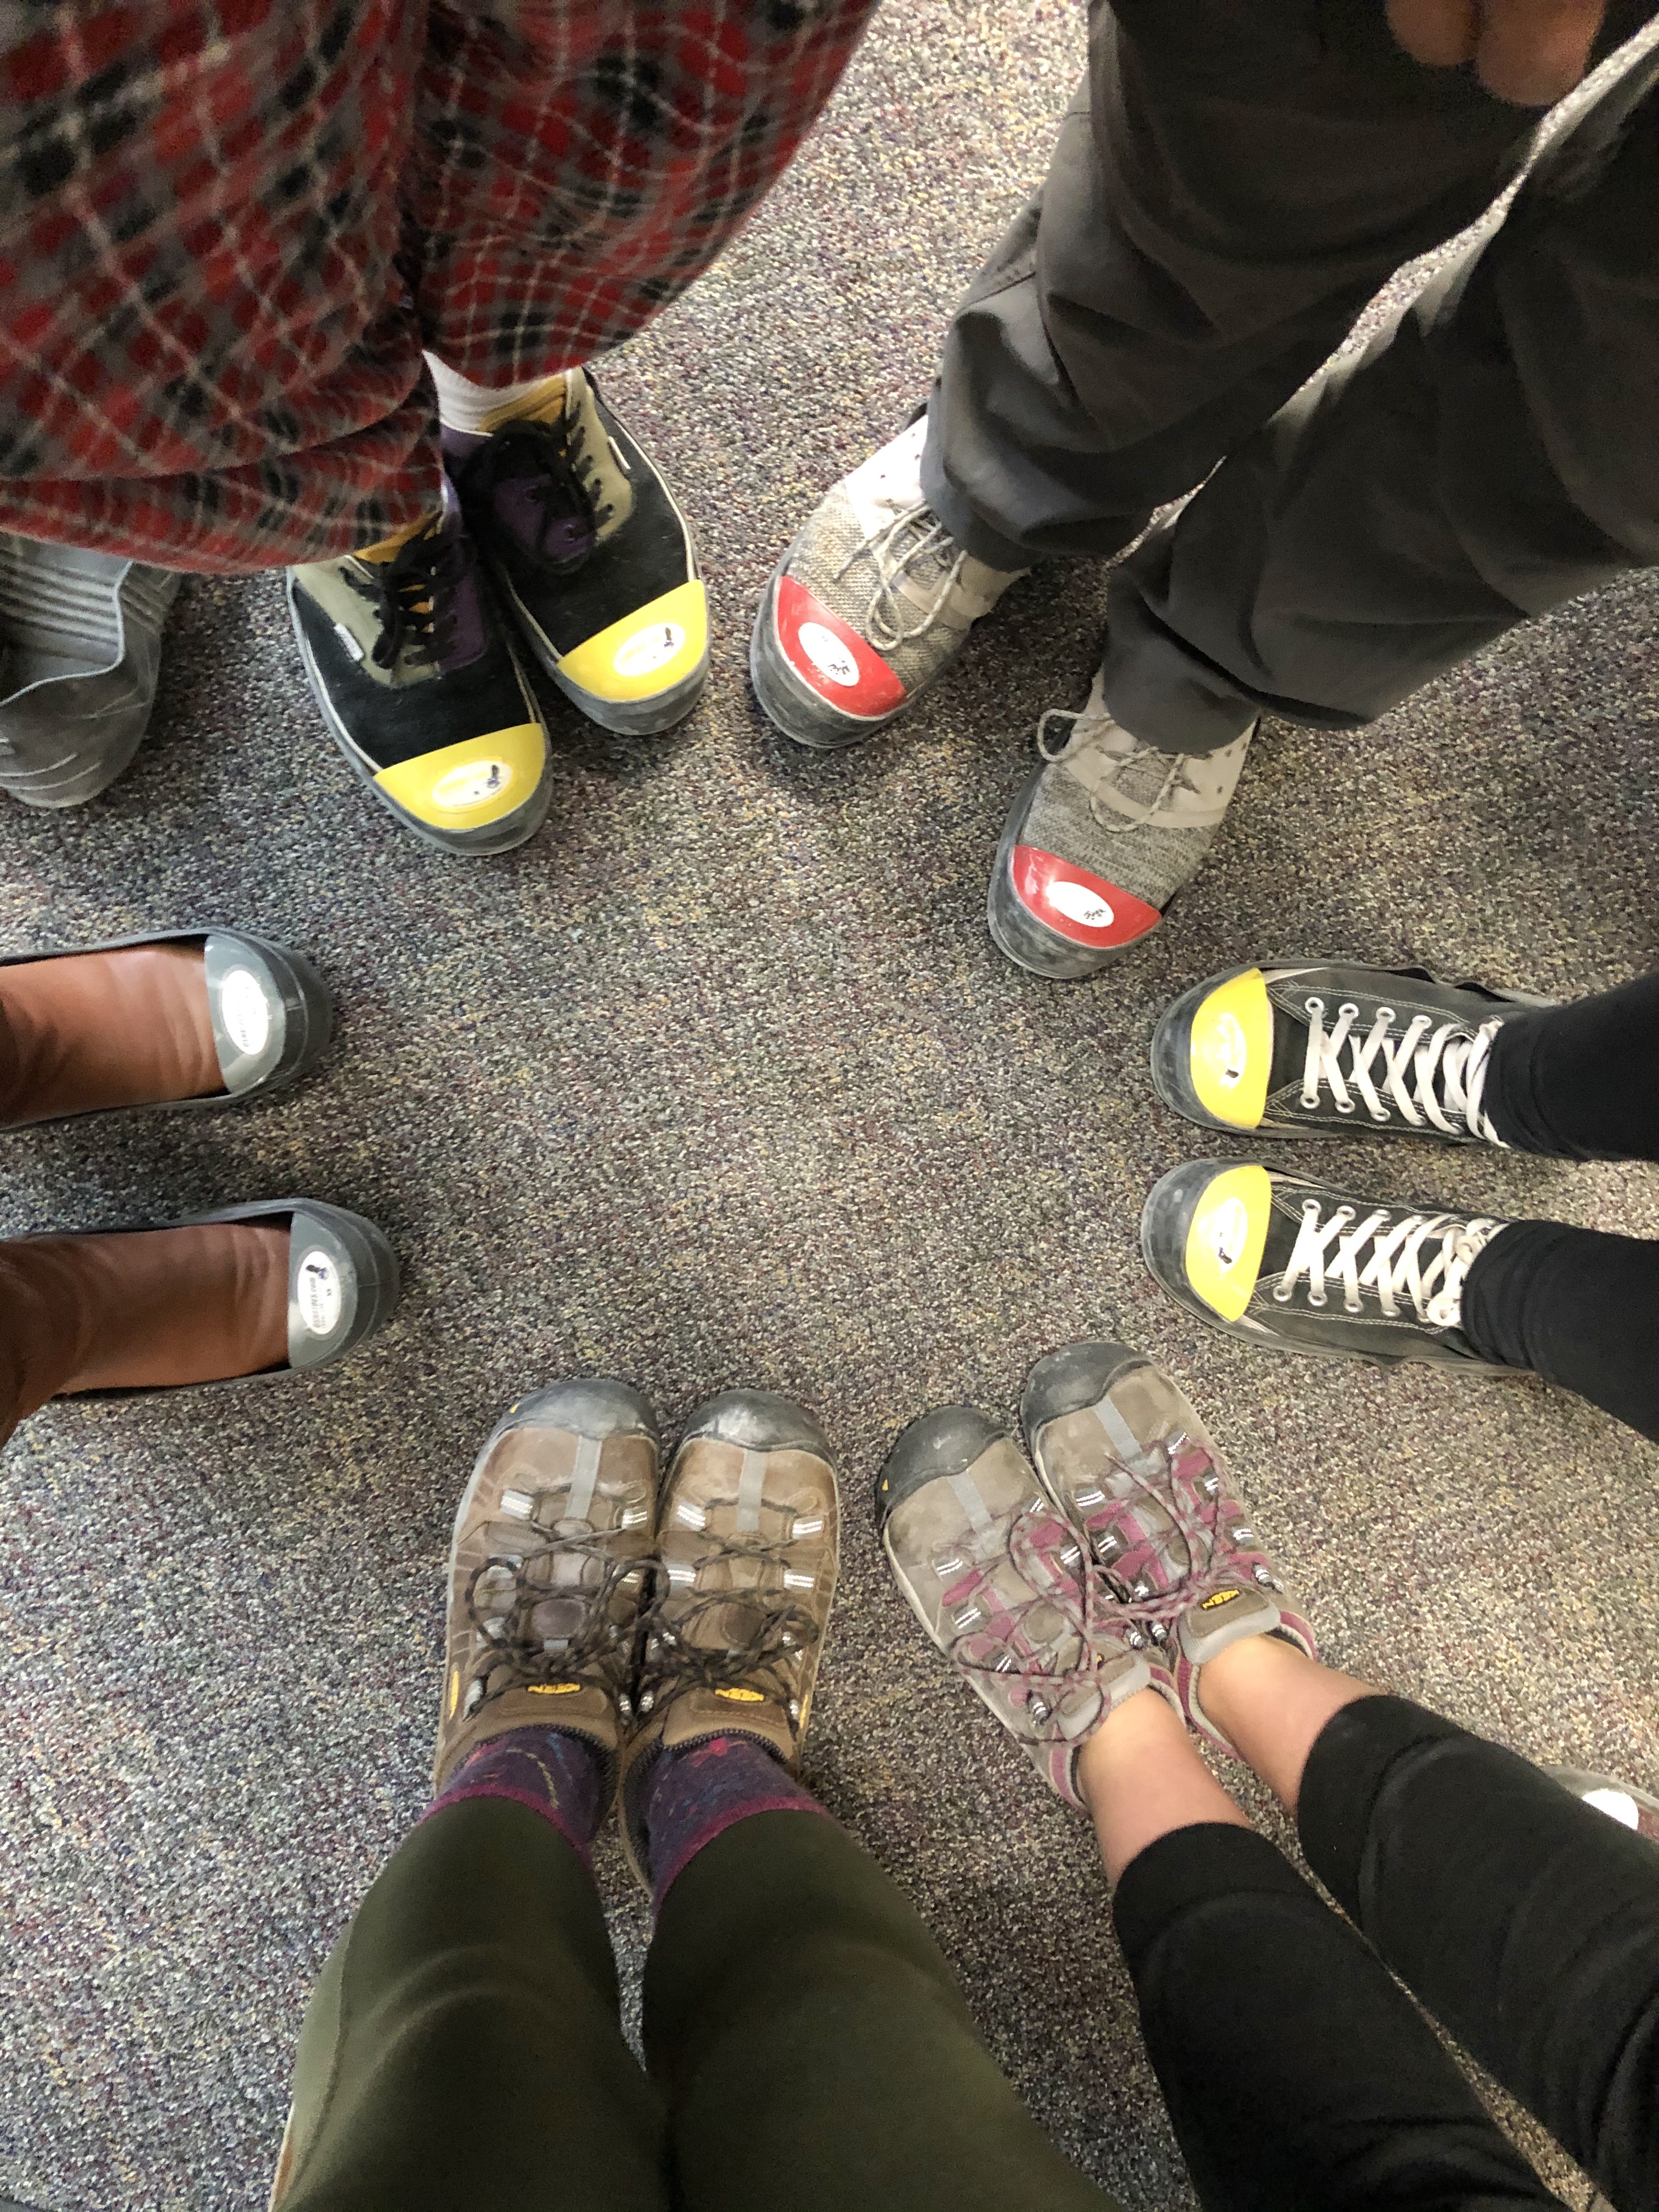 Students Wear Special Shoes On The Floor At Fulflex.